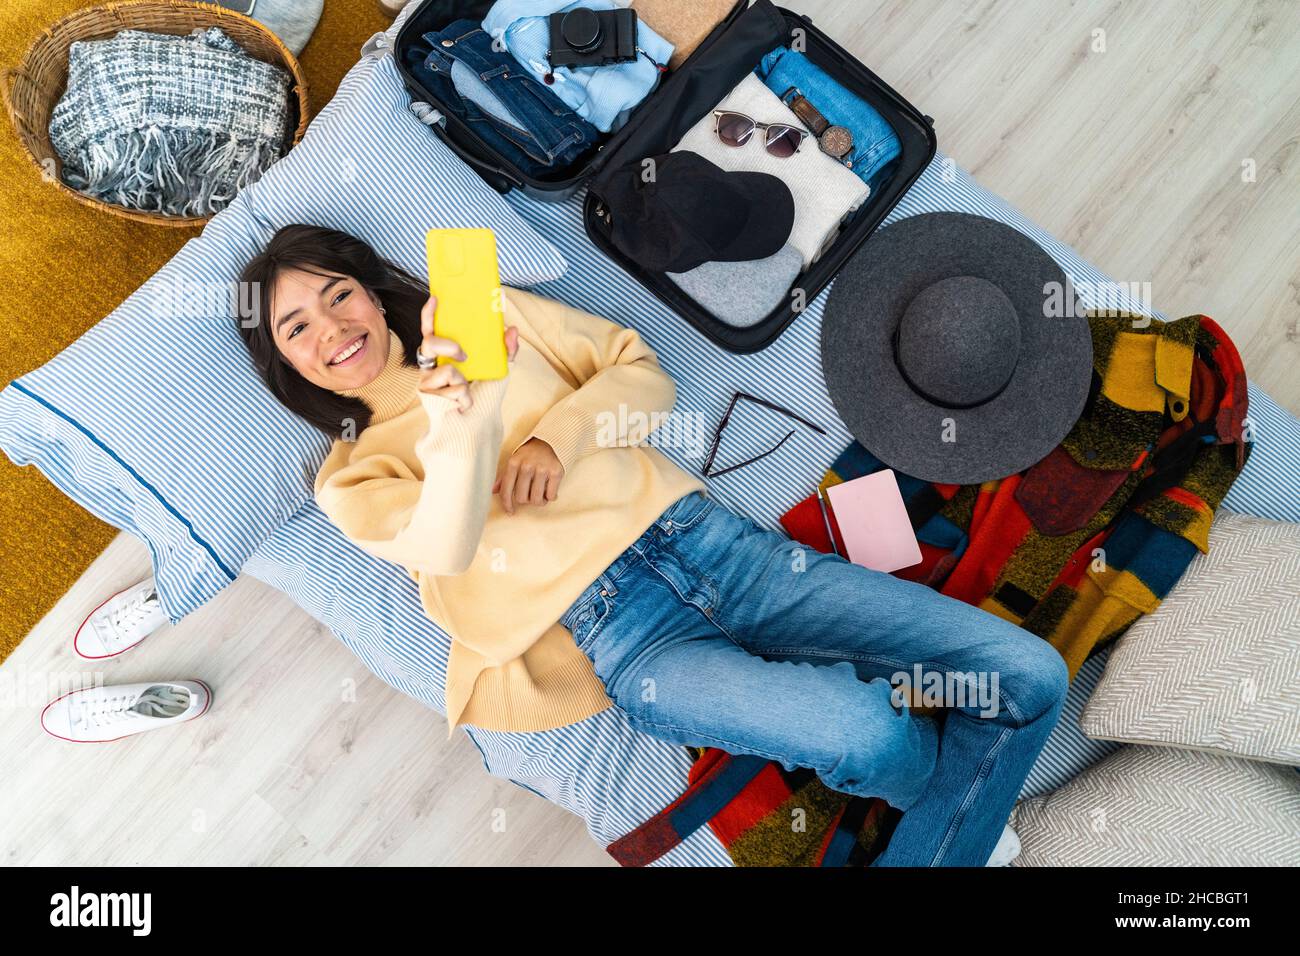 Smiling young woman taking selfie with smart phone while lying by luggage on bed Stock Photo